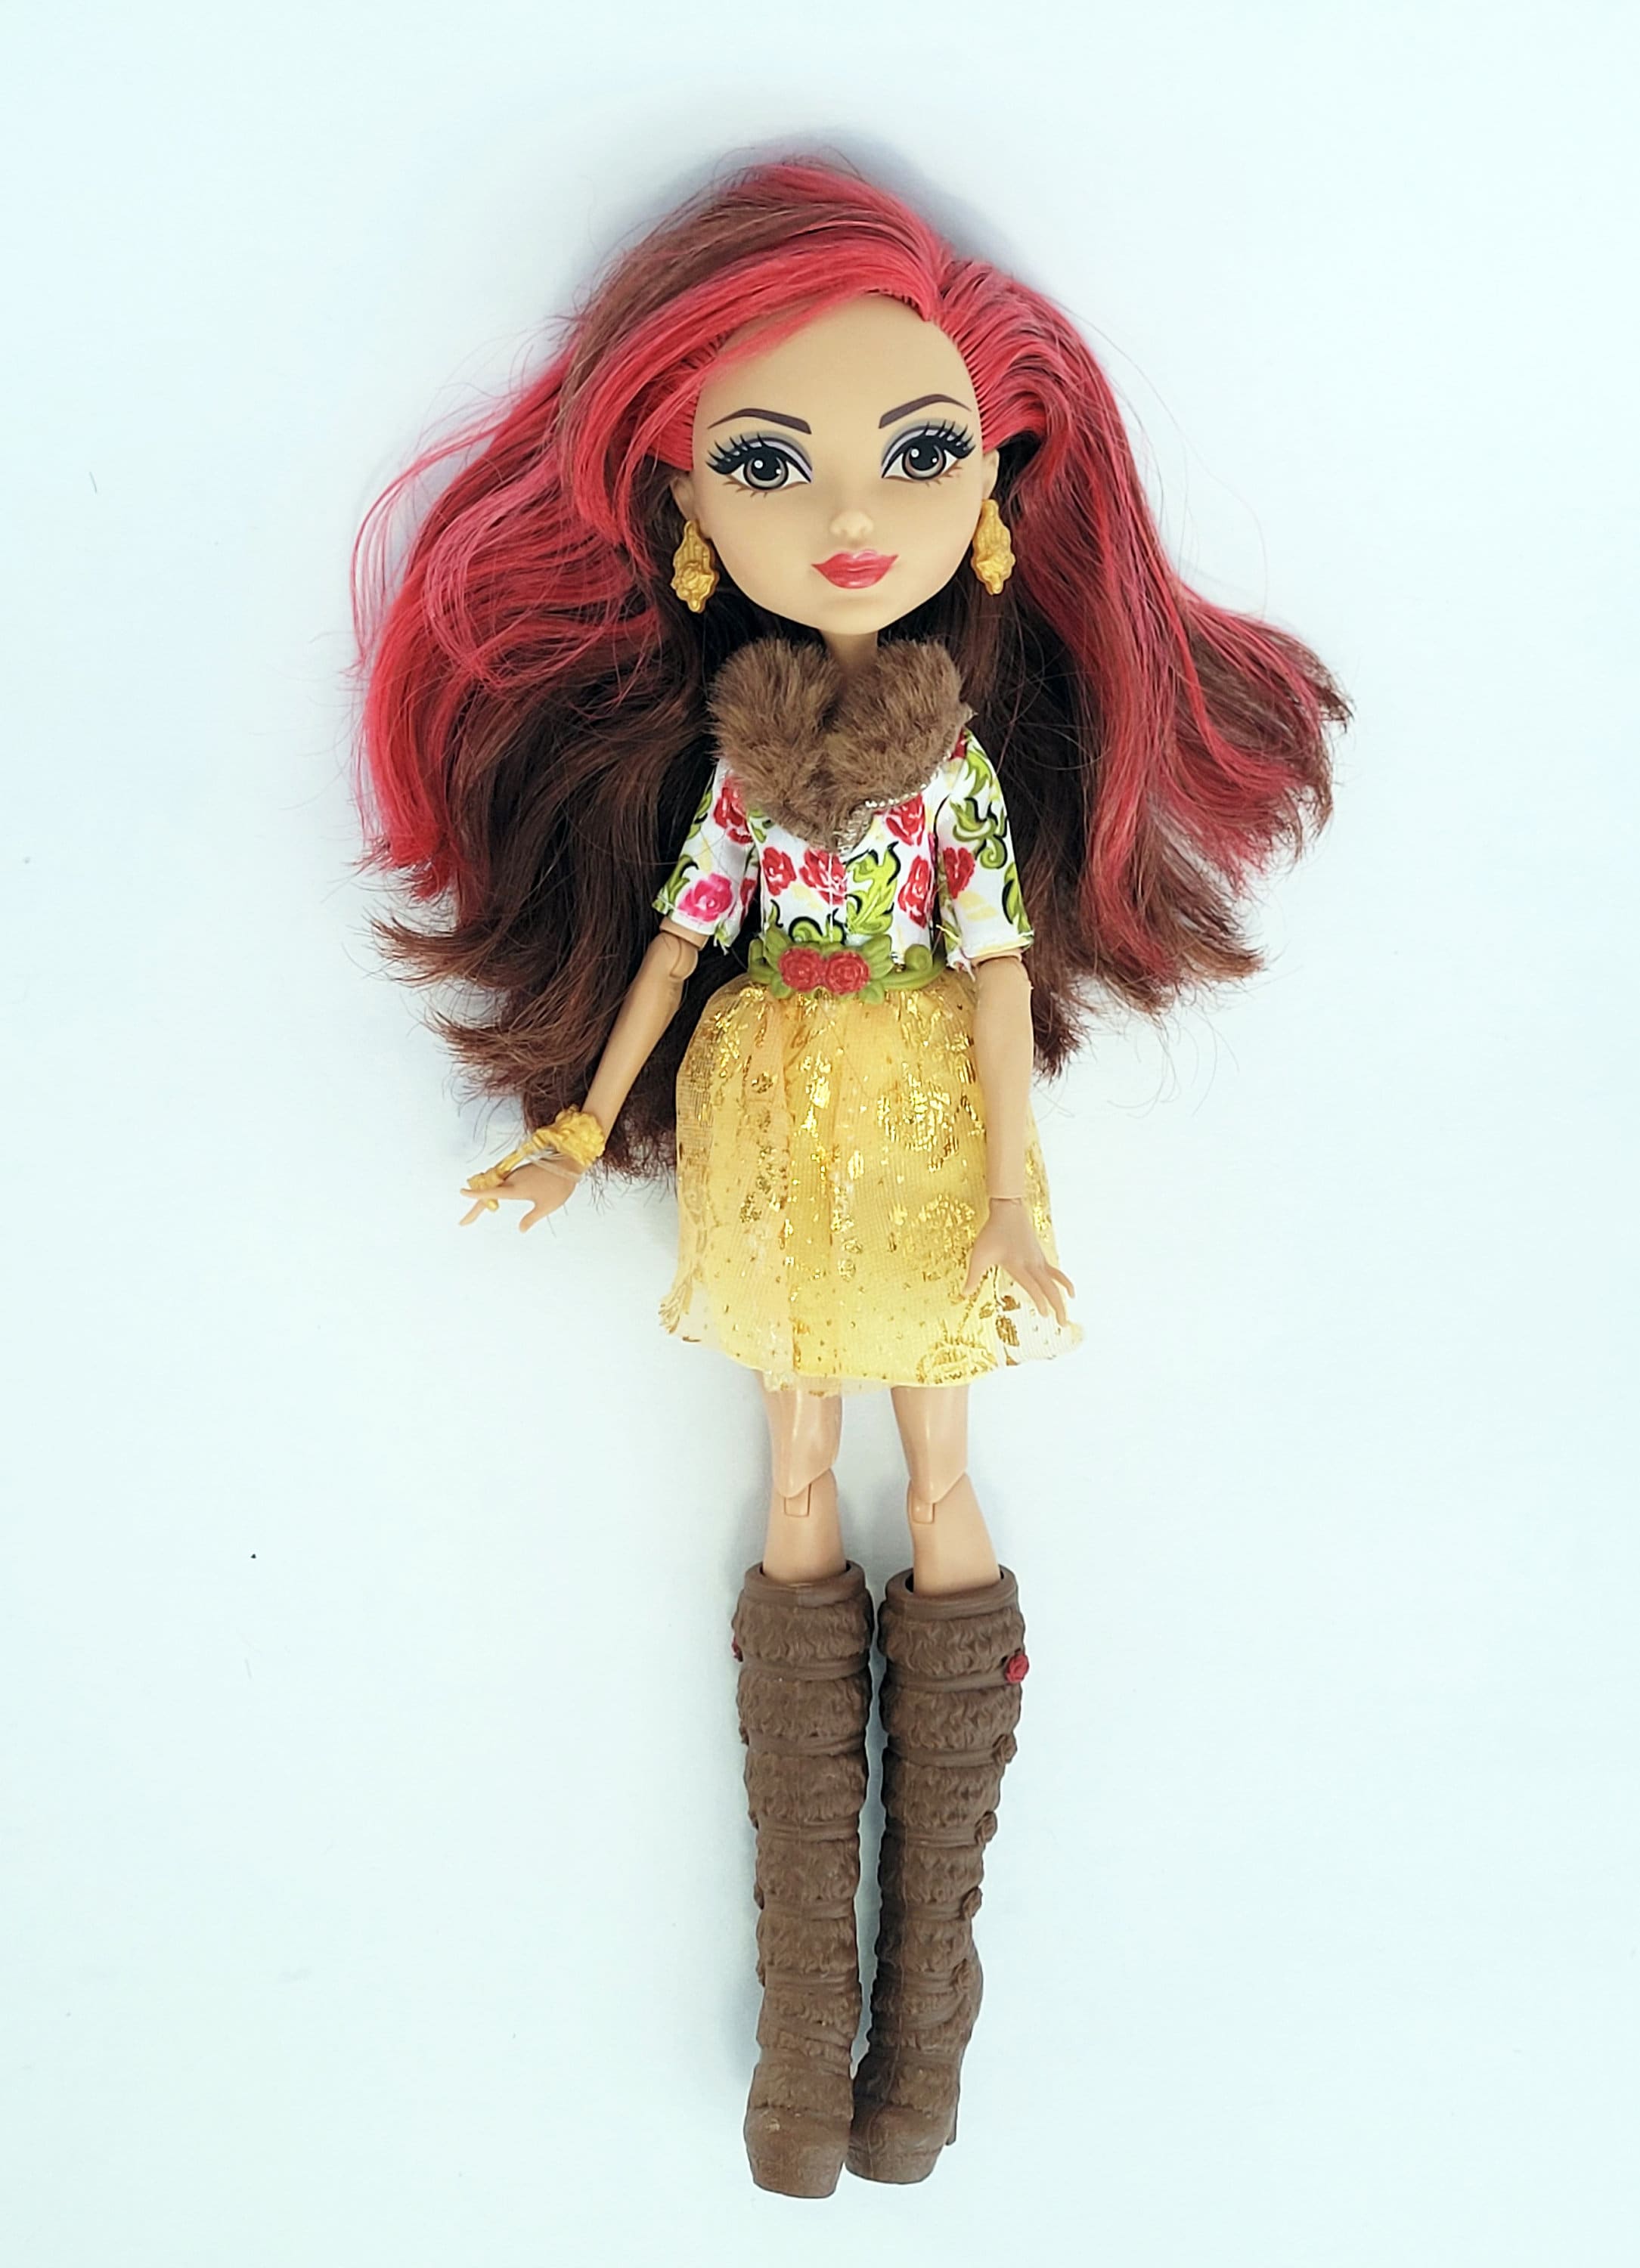 Tiny Frock Shop Ever After High Rosabella Beauty First Chapter Doll